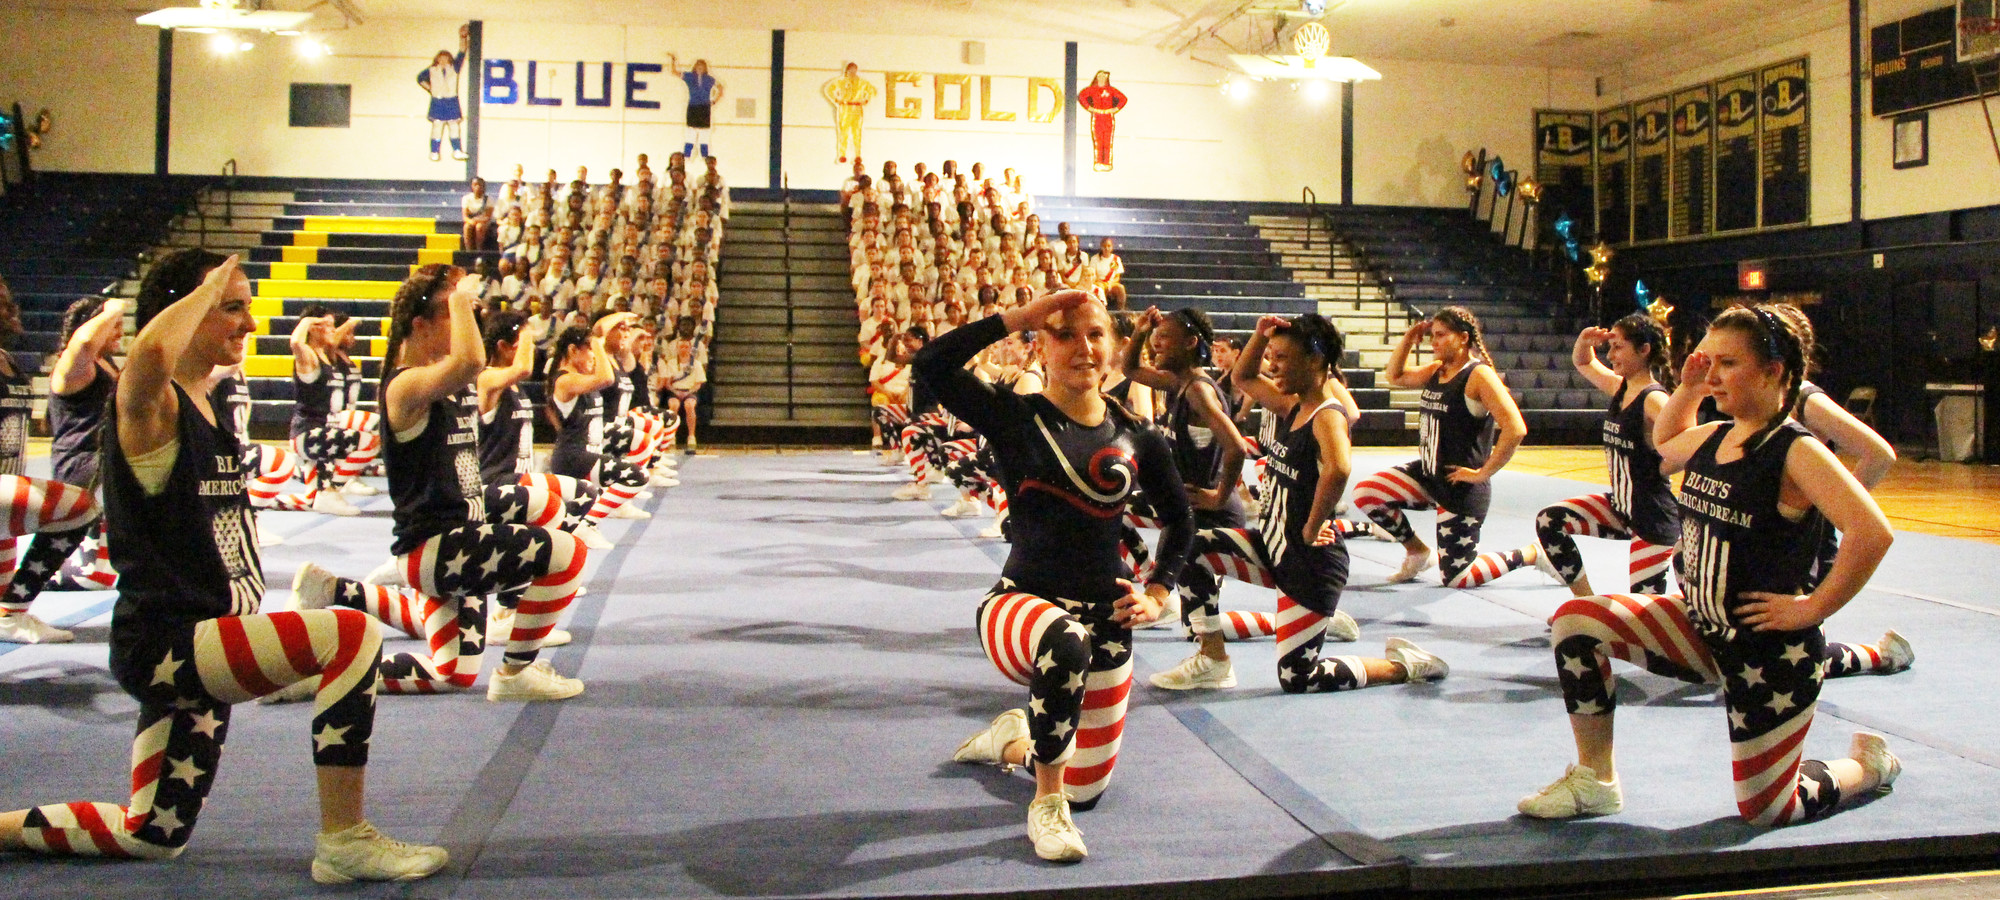 Baldwin High School students saluted during Sportsnite on March 14 while wearing a very patriotic ensemble.